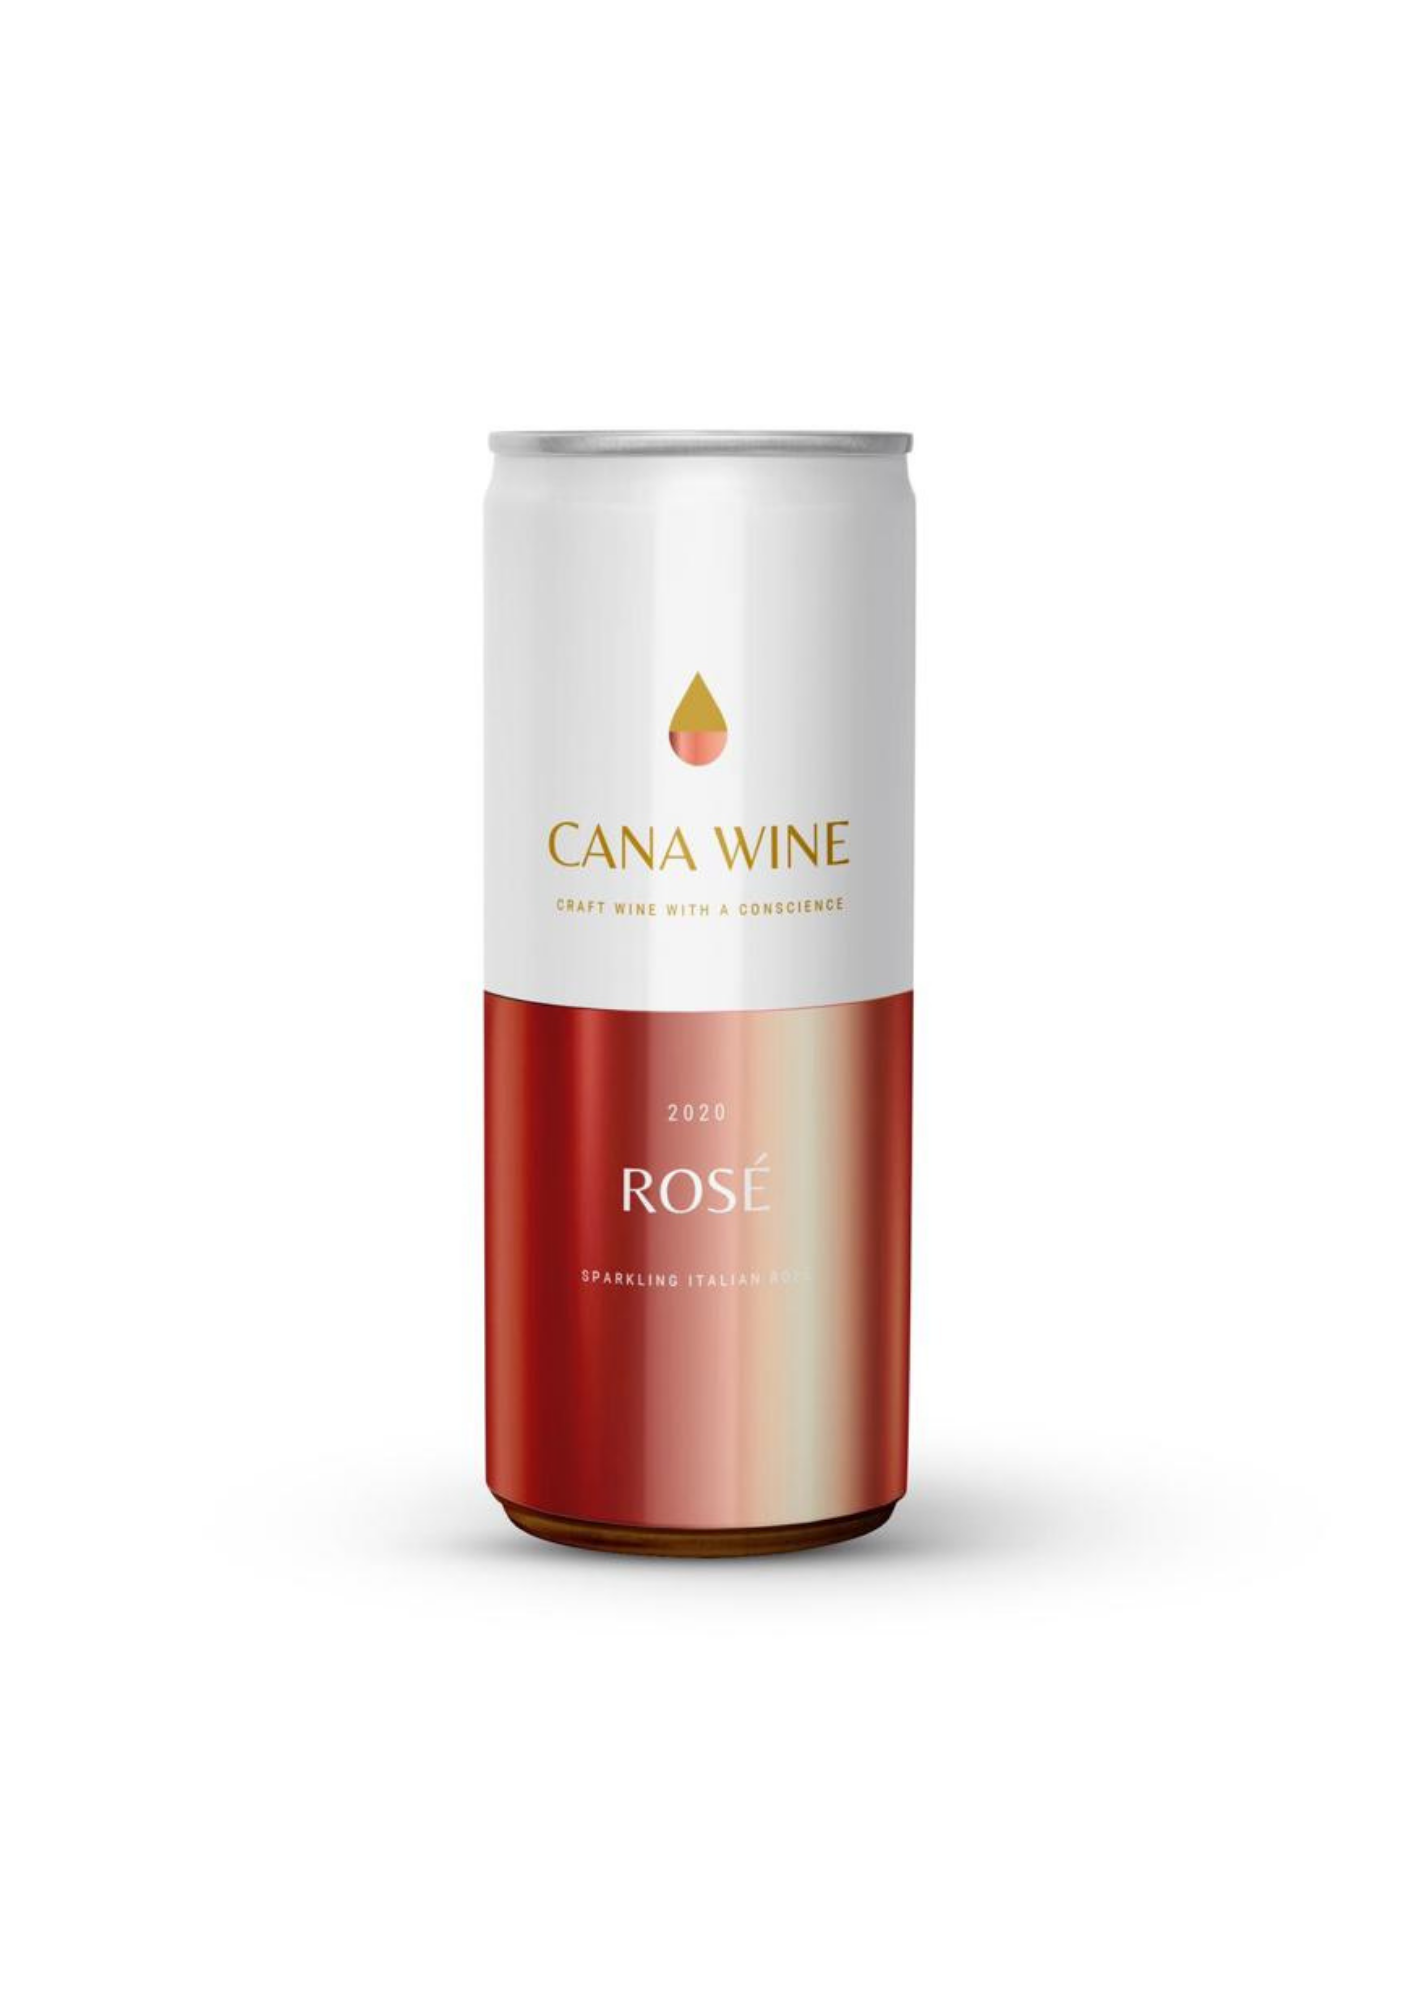 Cana Wine, Wine In A Can, Italian Canned Wine